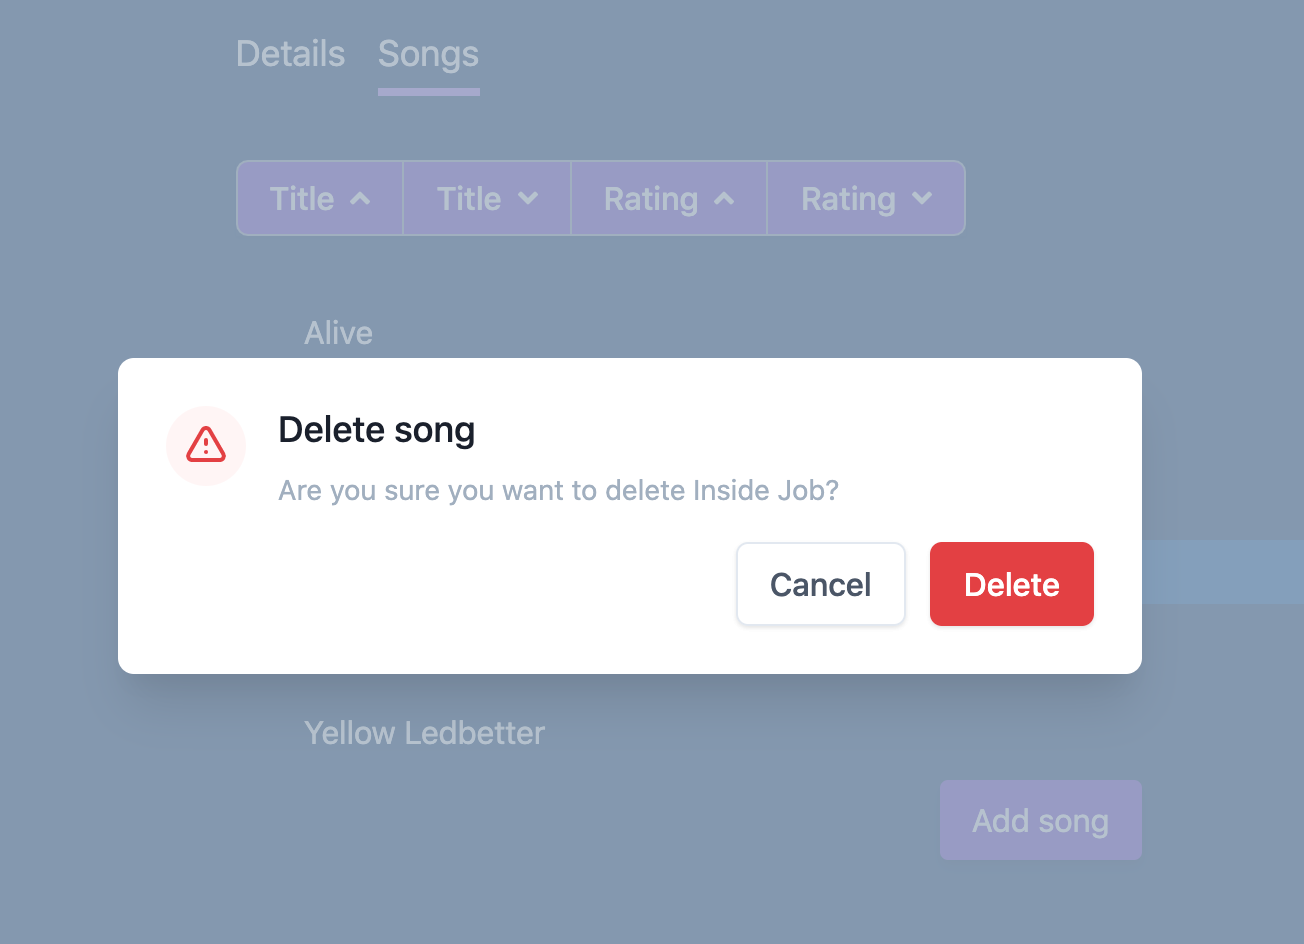 The modal to confirm deletion